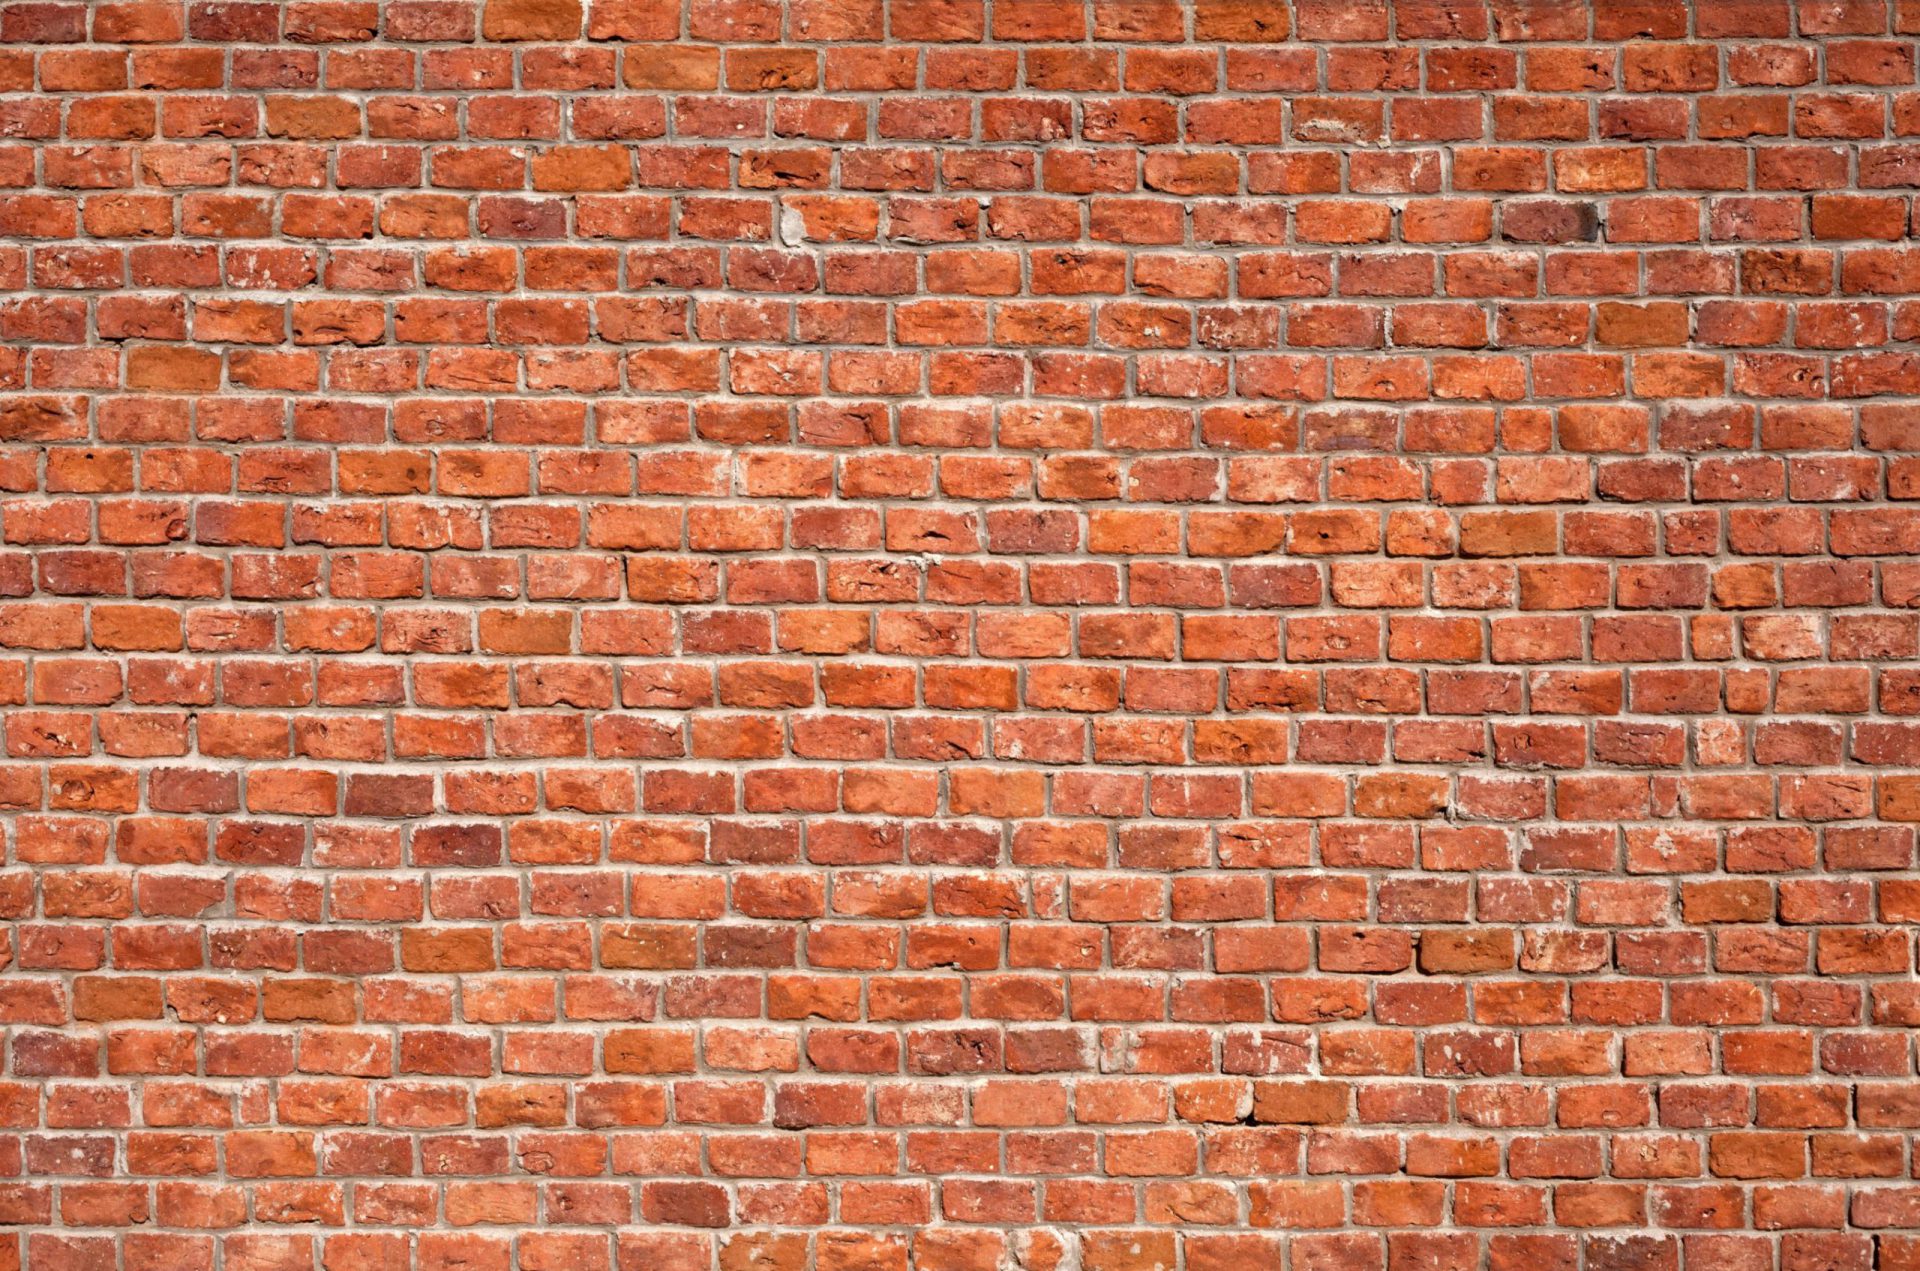 How to Tell If Your Brick Wall Needs Repair or Replacement